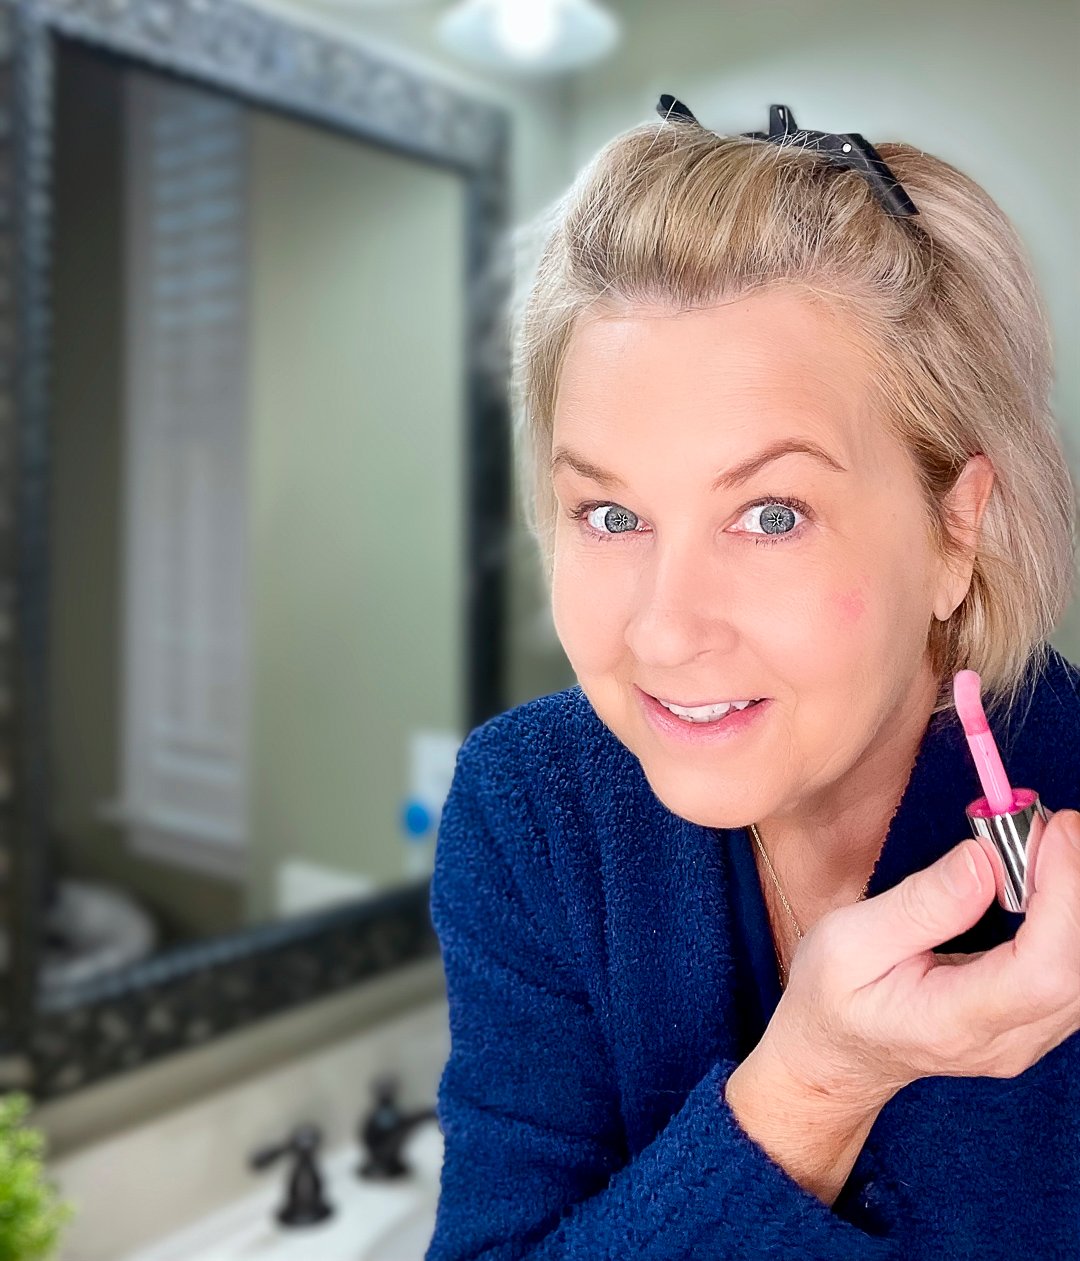 Over 40 Fashion Blogger, Tania Stephens is trying products from Walmart Beauty for August 2022 6